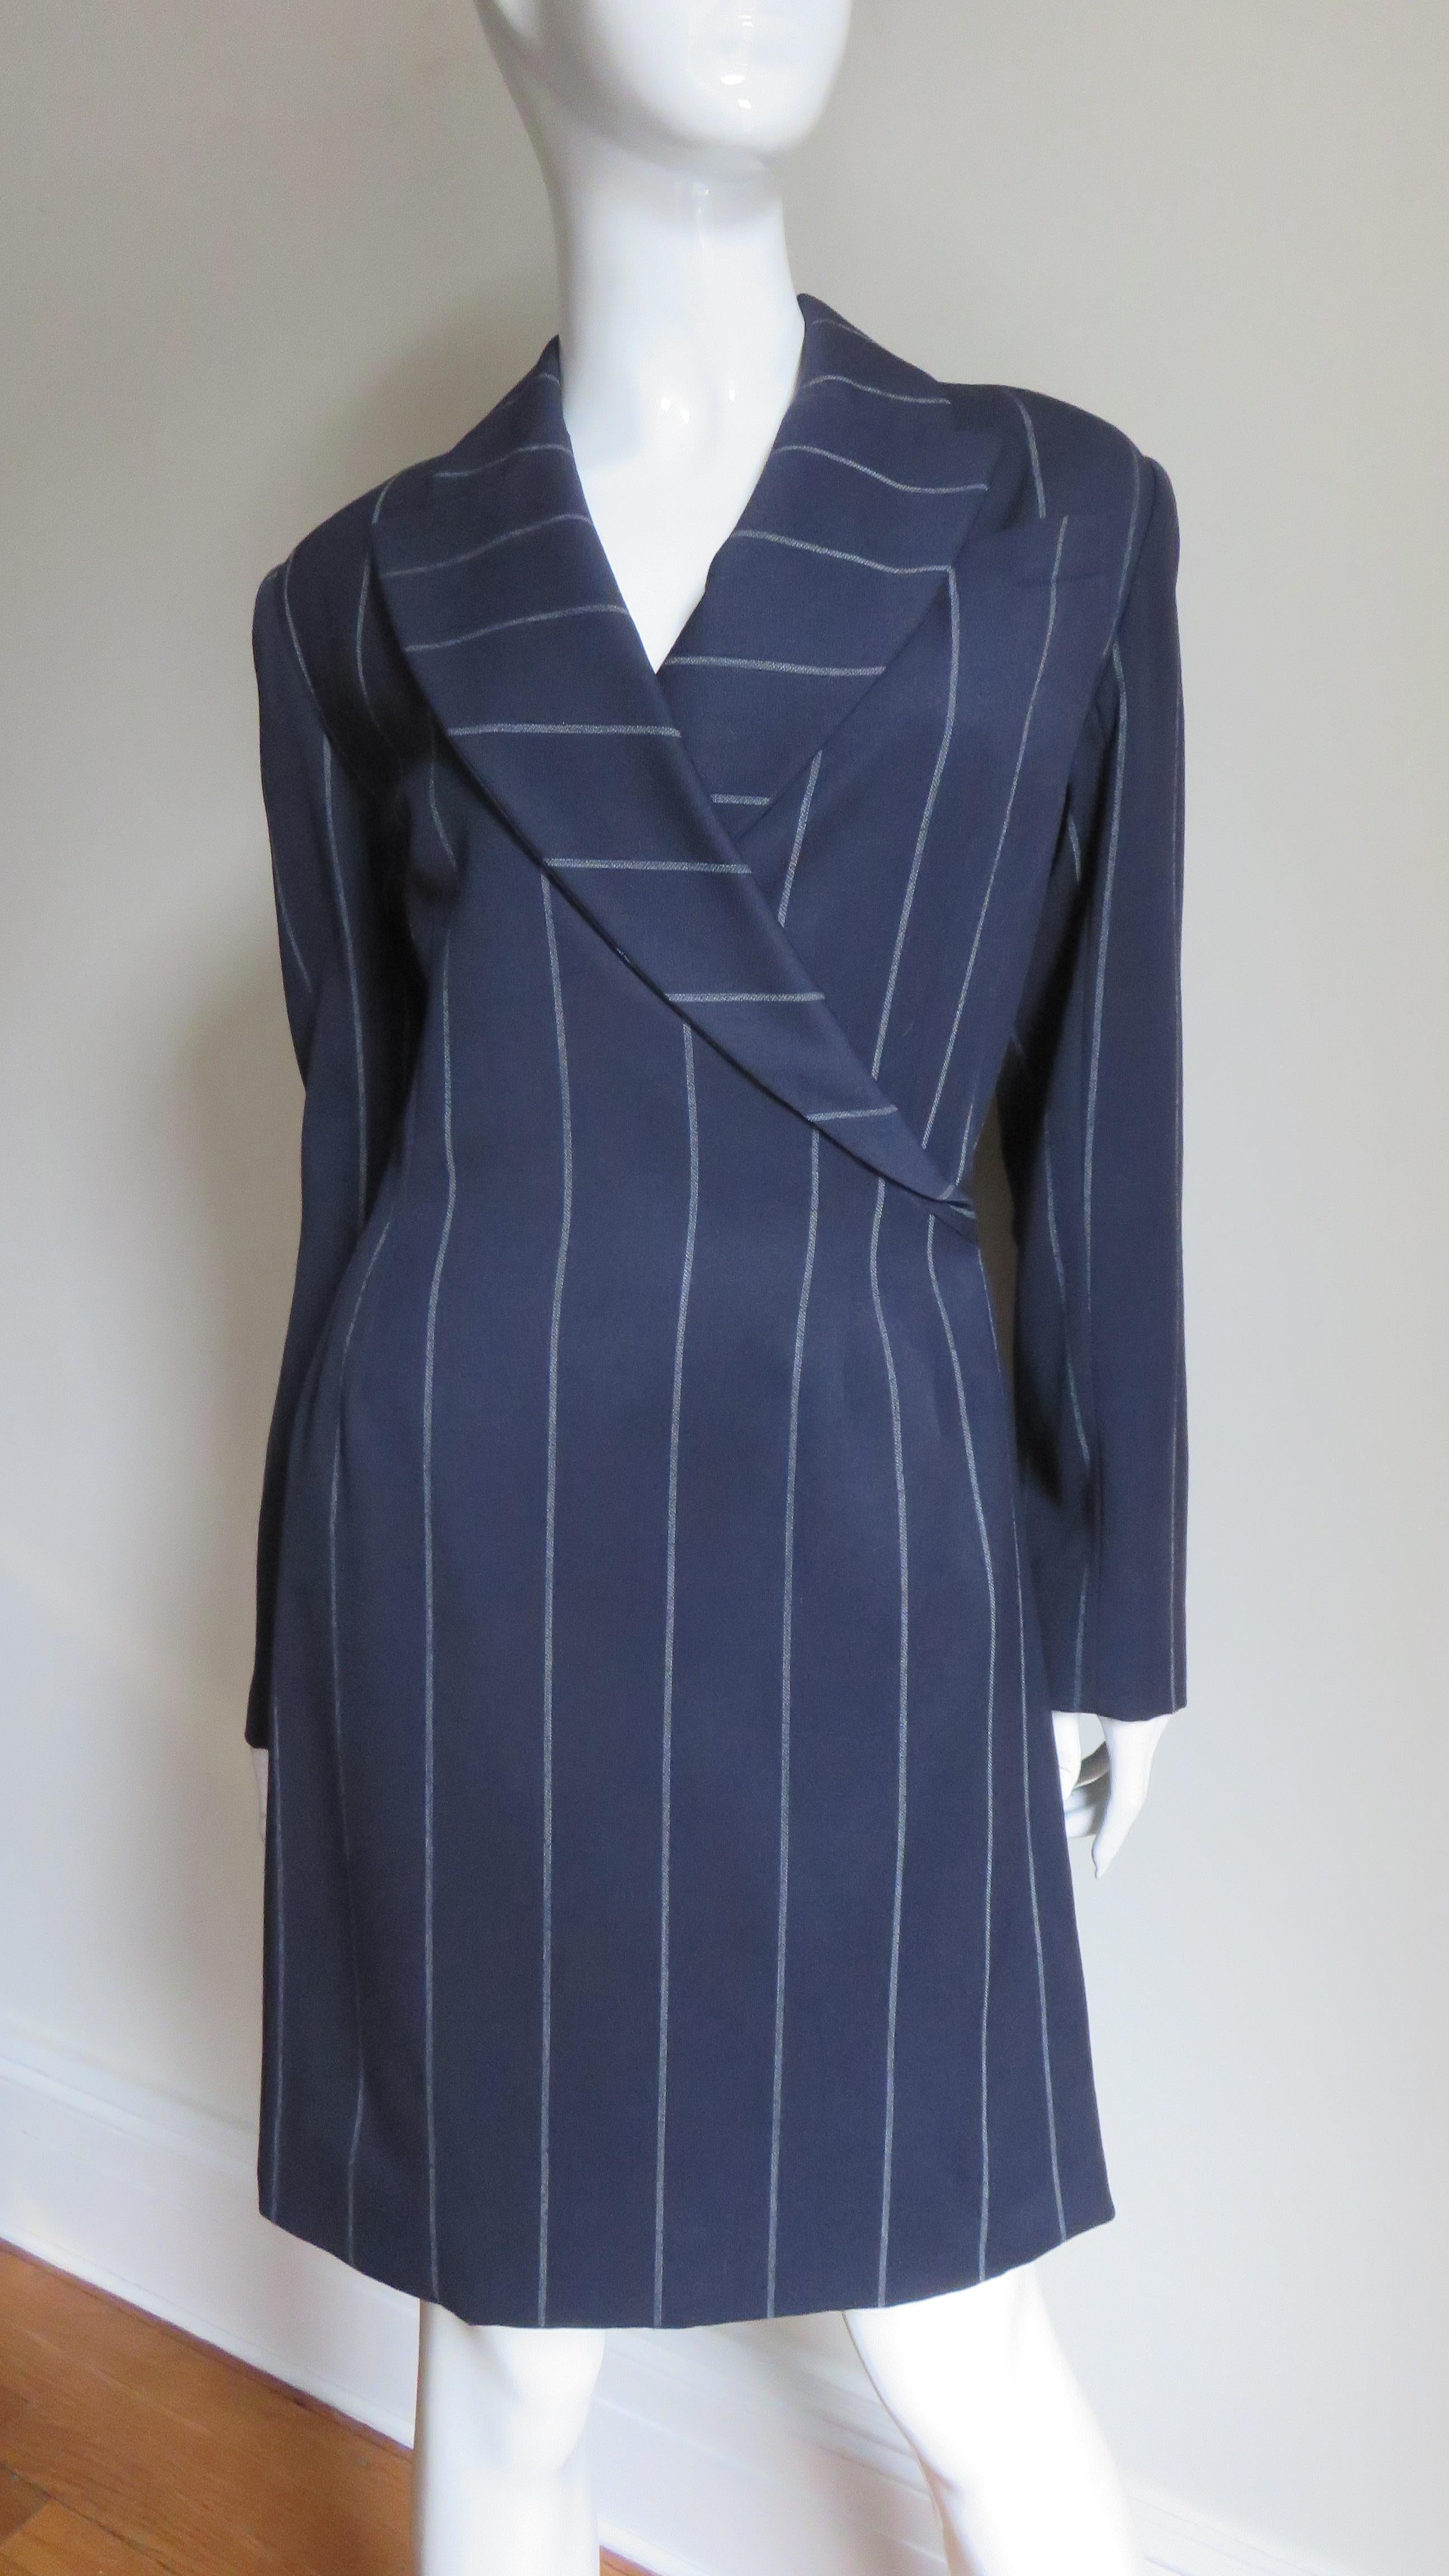 A great off white striped navy blue wool dress from Herve Leger.  The semi fitted wrap style dress has a breast pocket, peaked lapels and a double vent on top of a single vent in the back skirt for a bit of a twist. The dress is fully lined, has